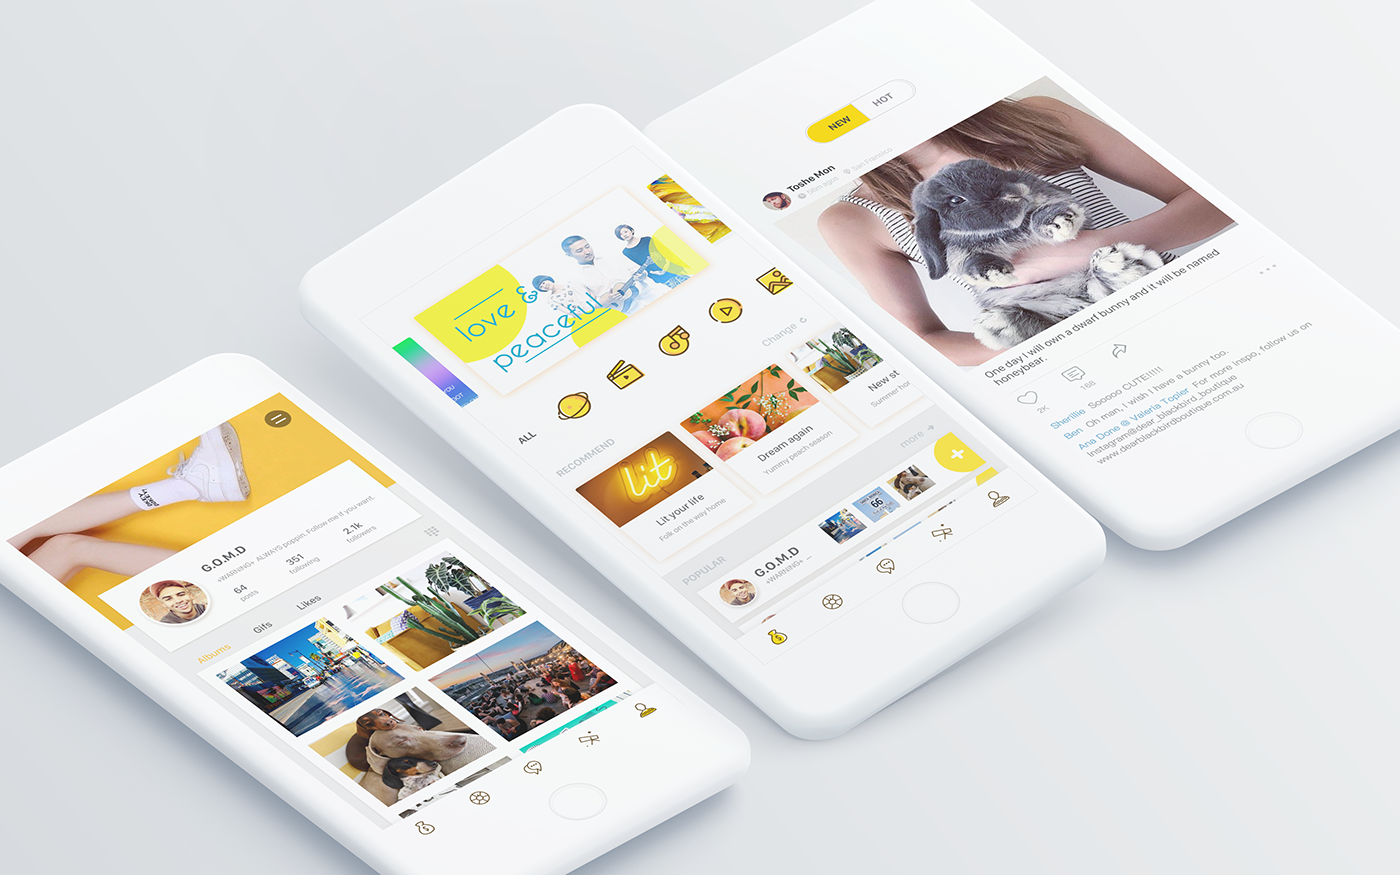 update yellowapp lightcolor apppages homepage usercenter news lighticons summerproduct